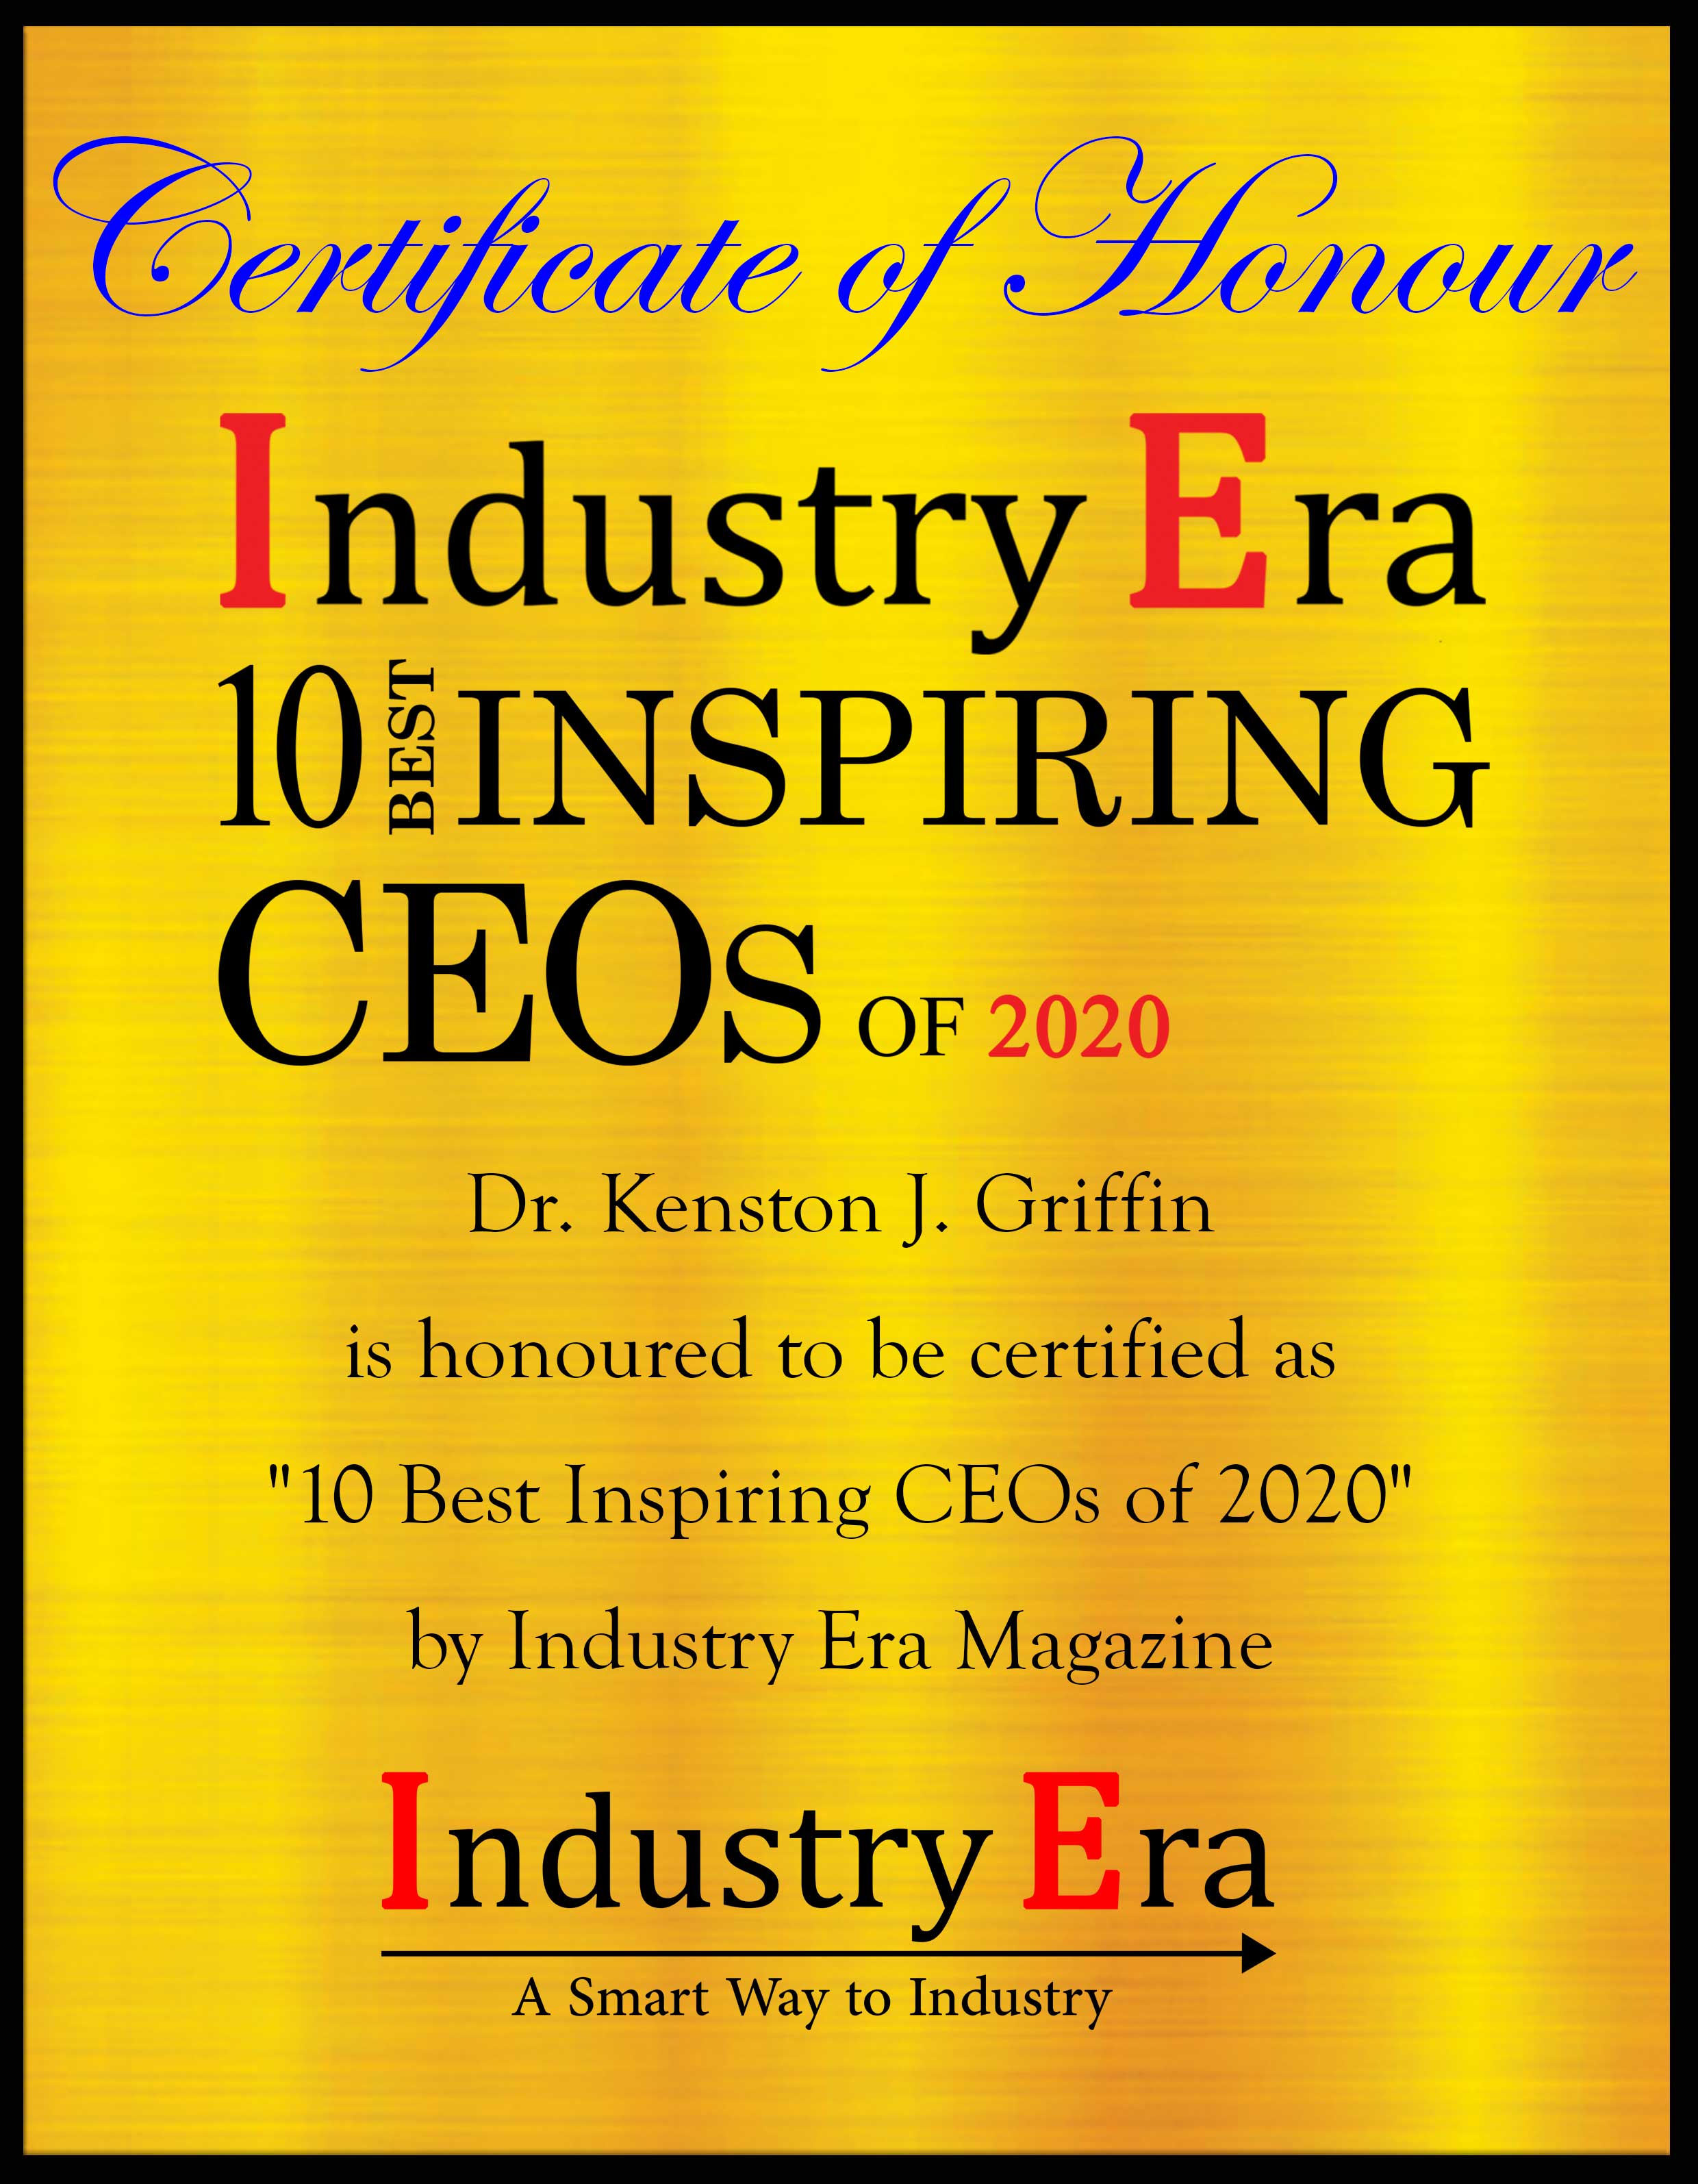 Dr. Kenston J. Griffin Founder and CEO DreamBuilders Communication, Inc. Certificate